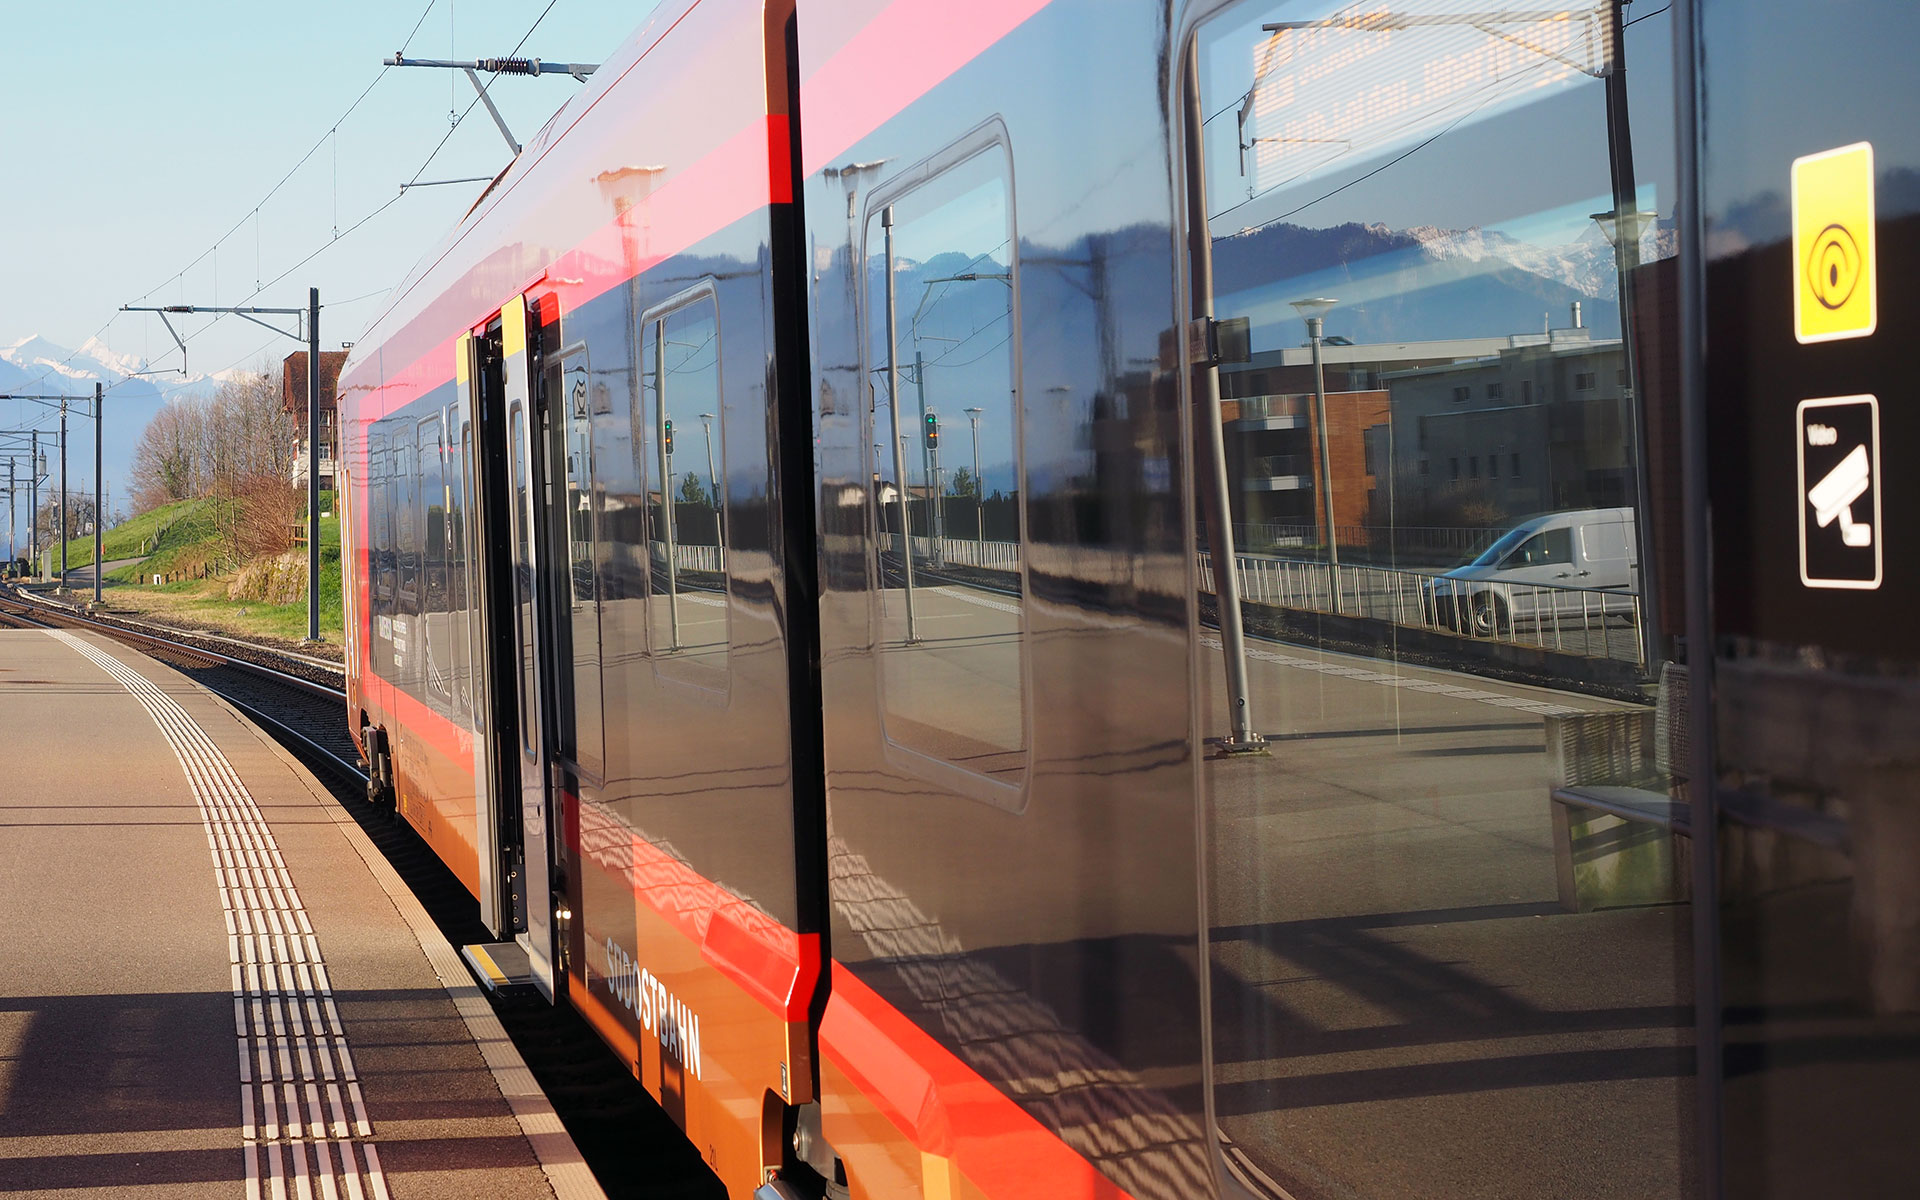 A Südostbahn PE train on the route from St Gallen to Lucerne (photo © hidden europe).